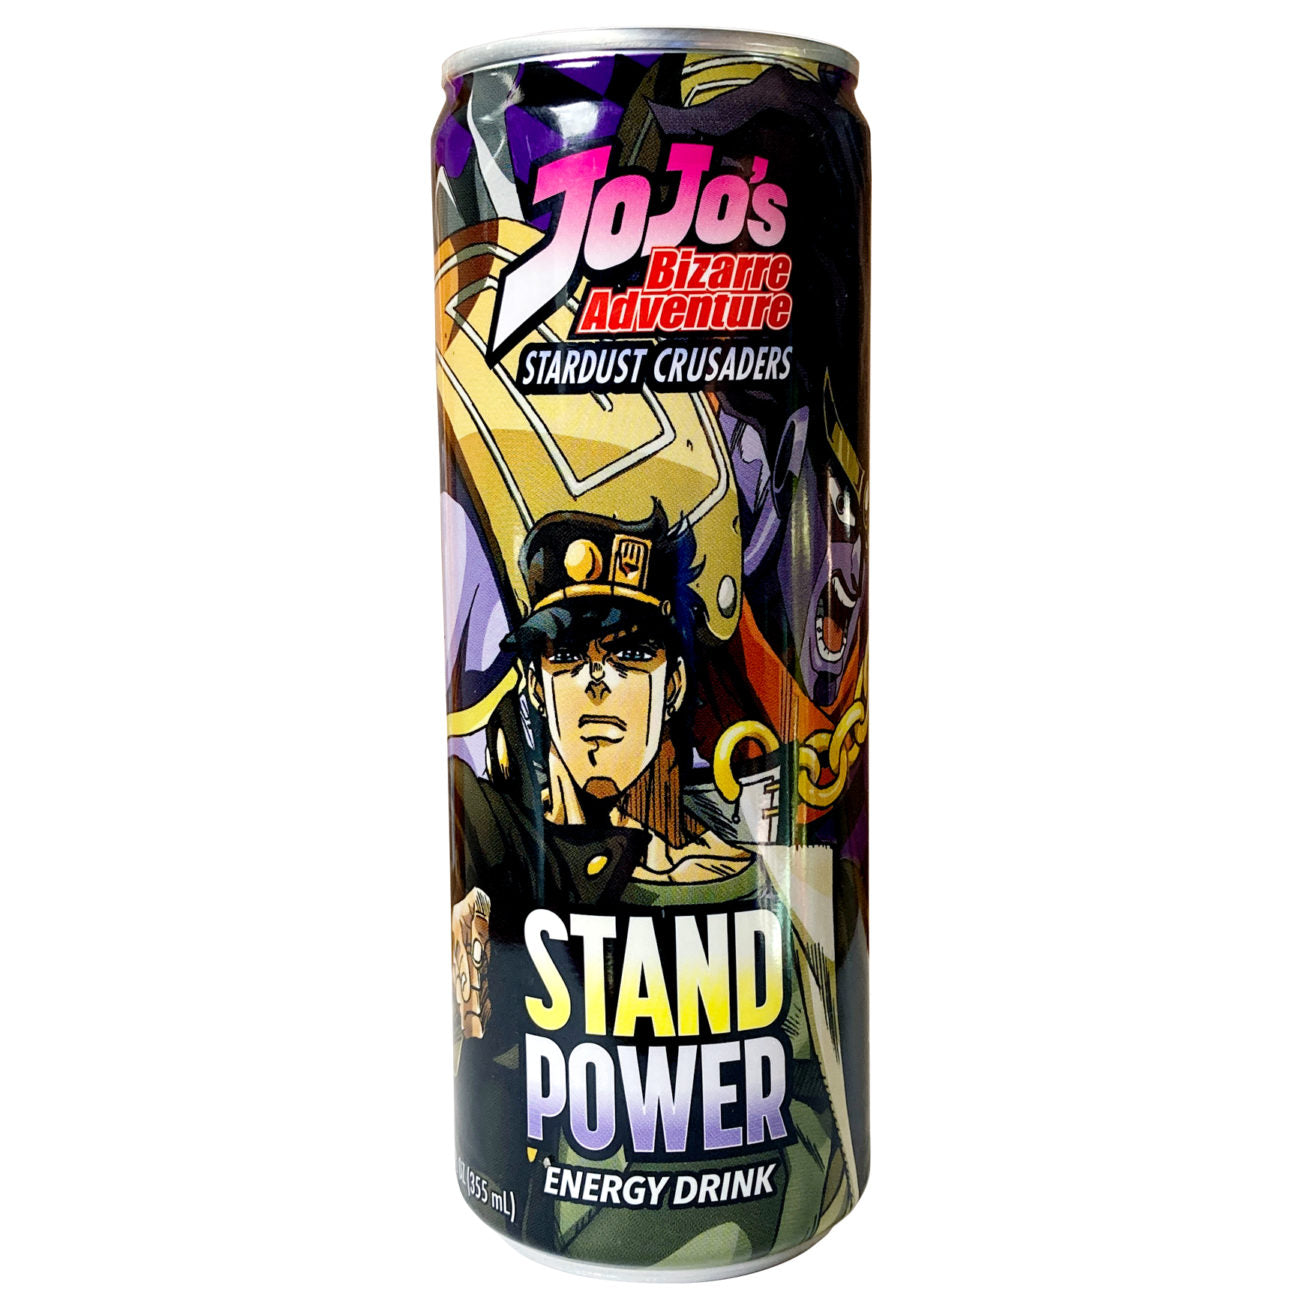 Me as a JoJo character. Not sure what the stand power could be tho